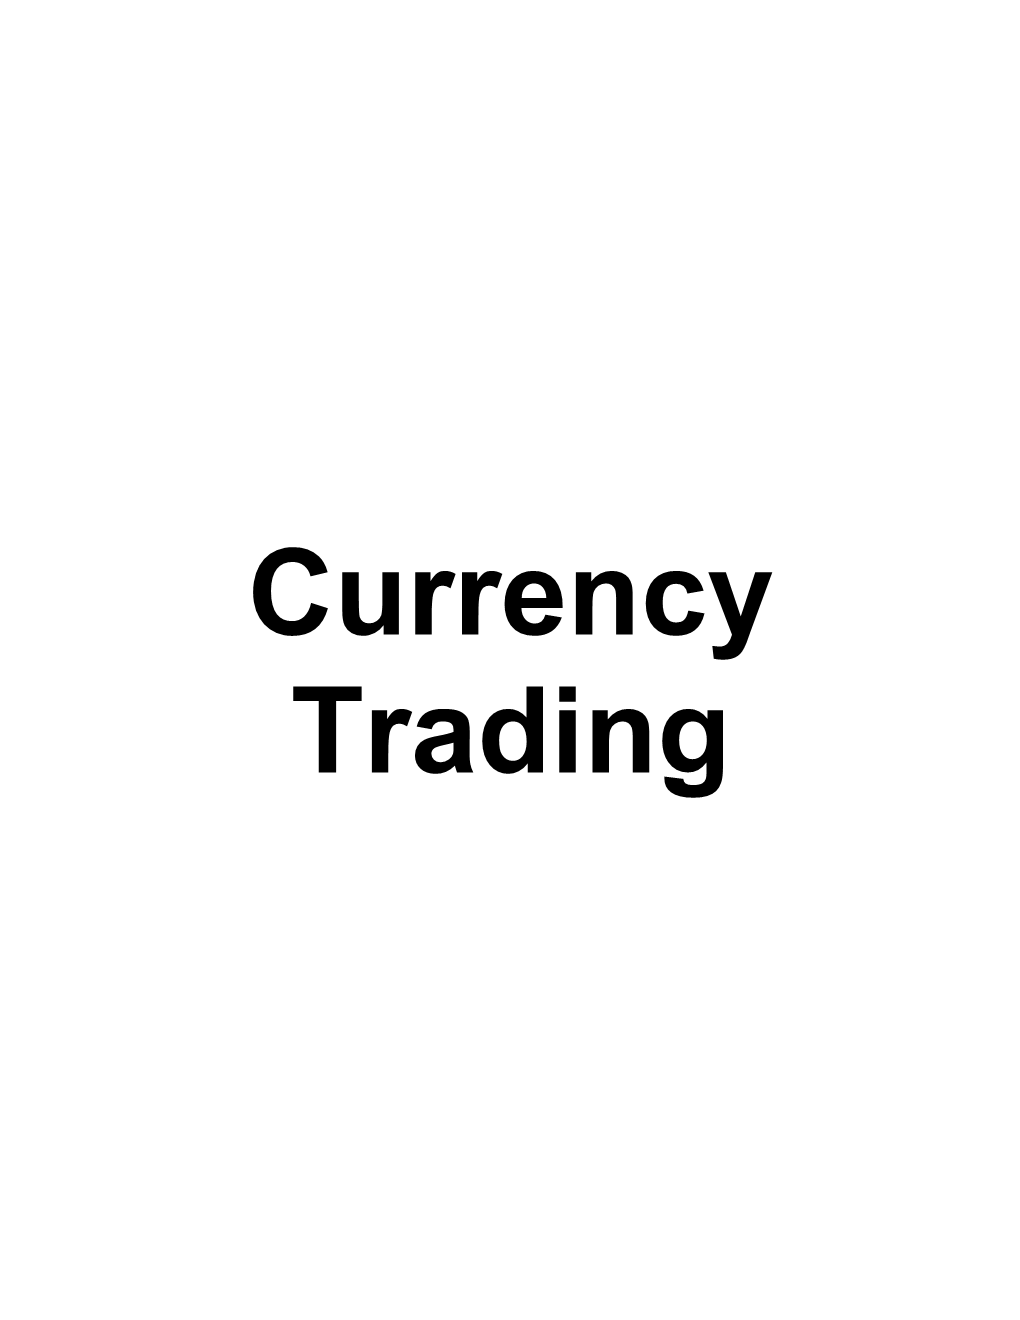 Currency Markets